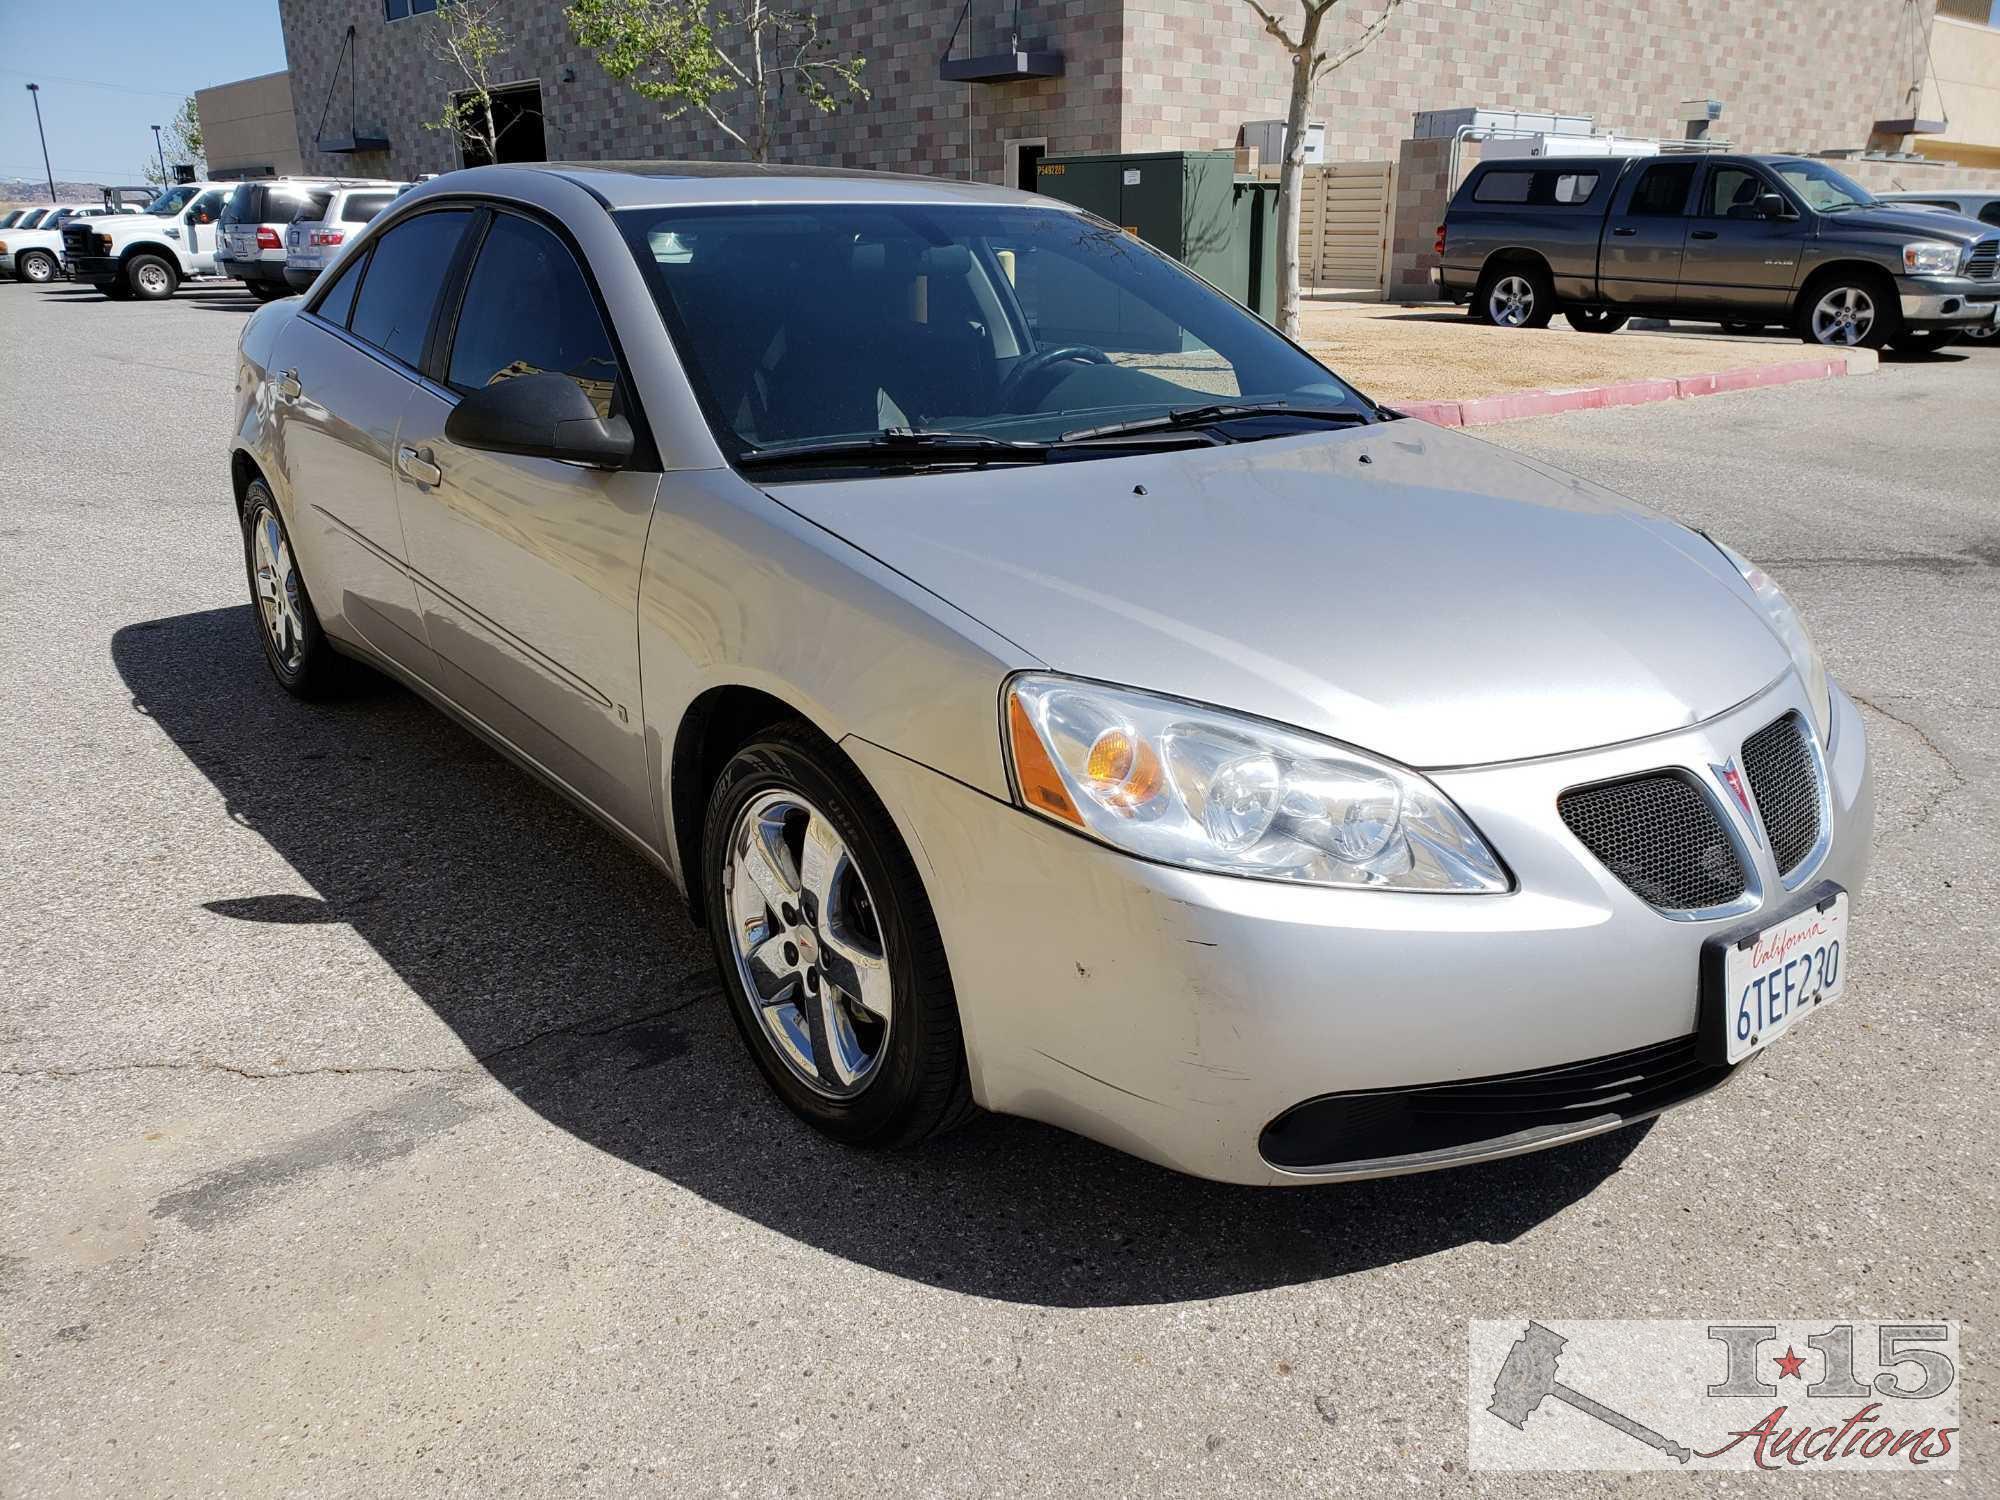 2005 Pontiac G6 GT Silver with Current Smog!!